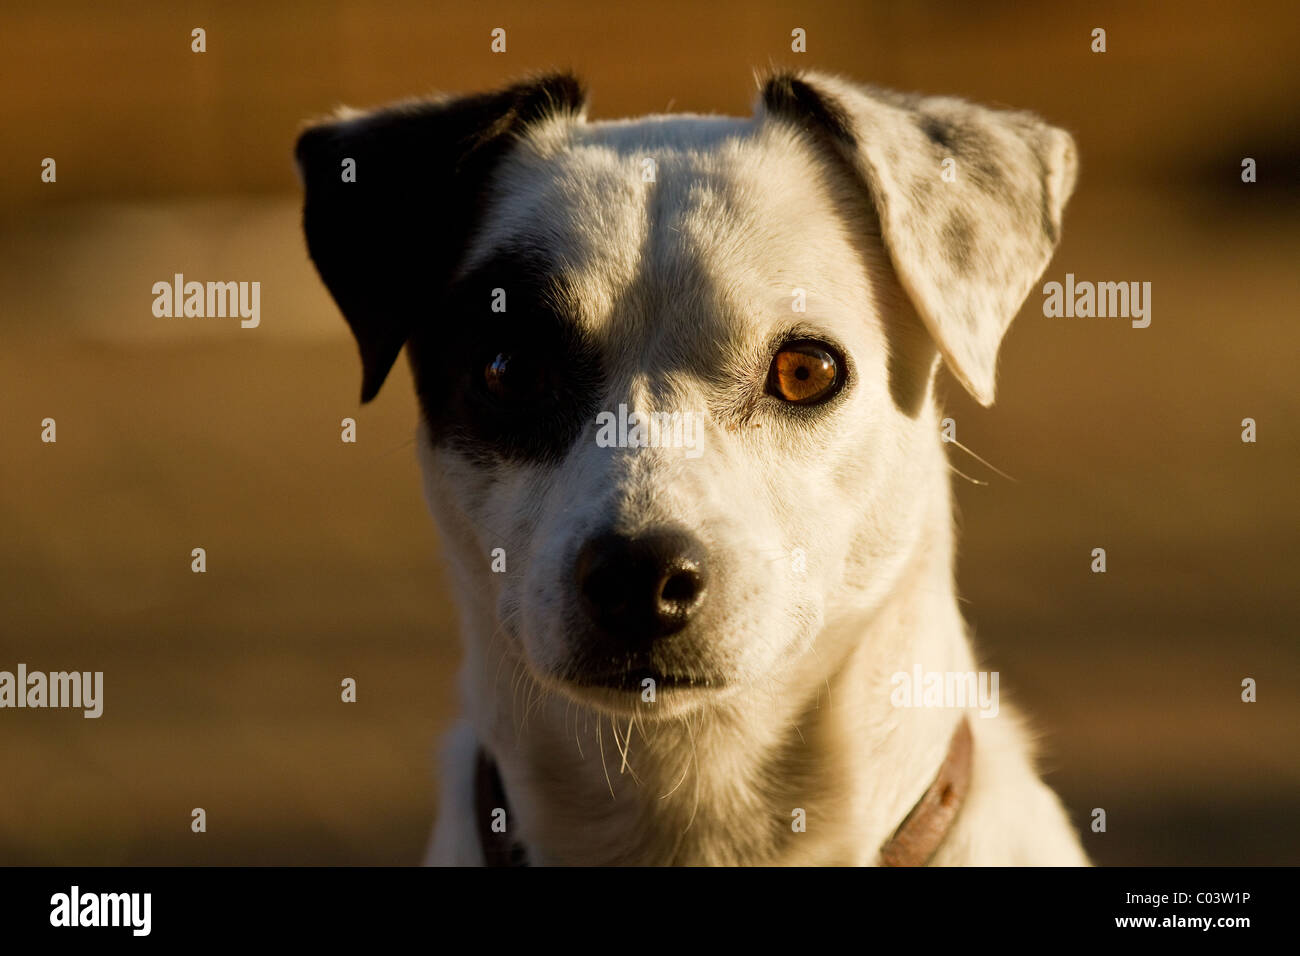 Close-up of jack russell terrier pet looking alert Stock Photo